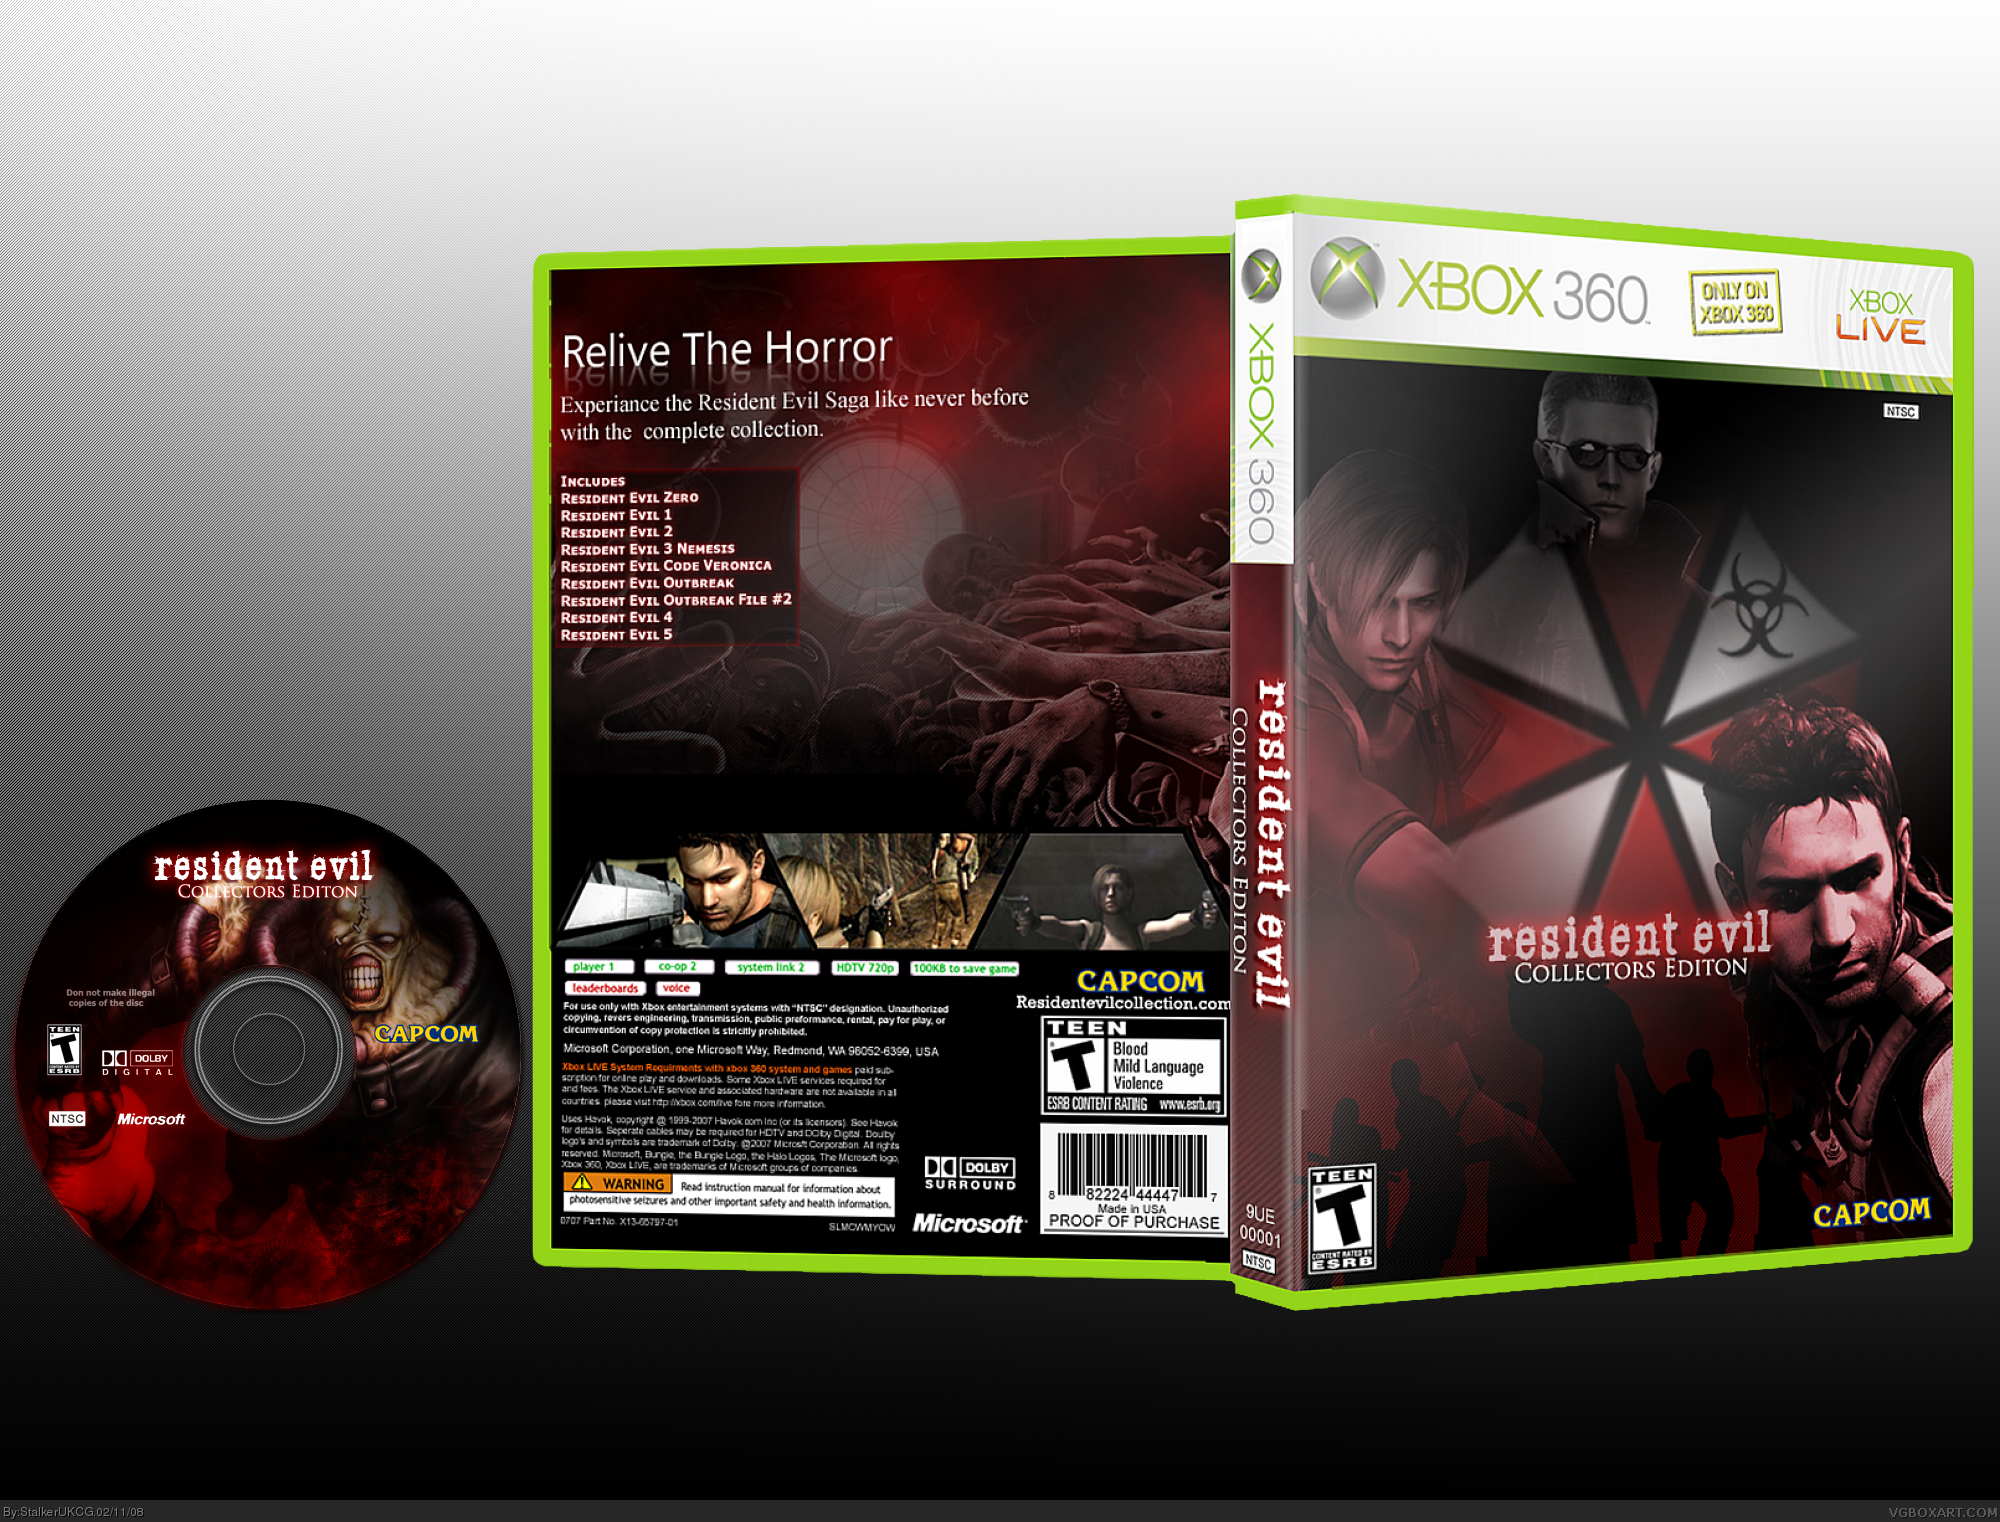 Resident Evil Collector's Edition box cover